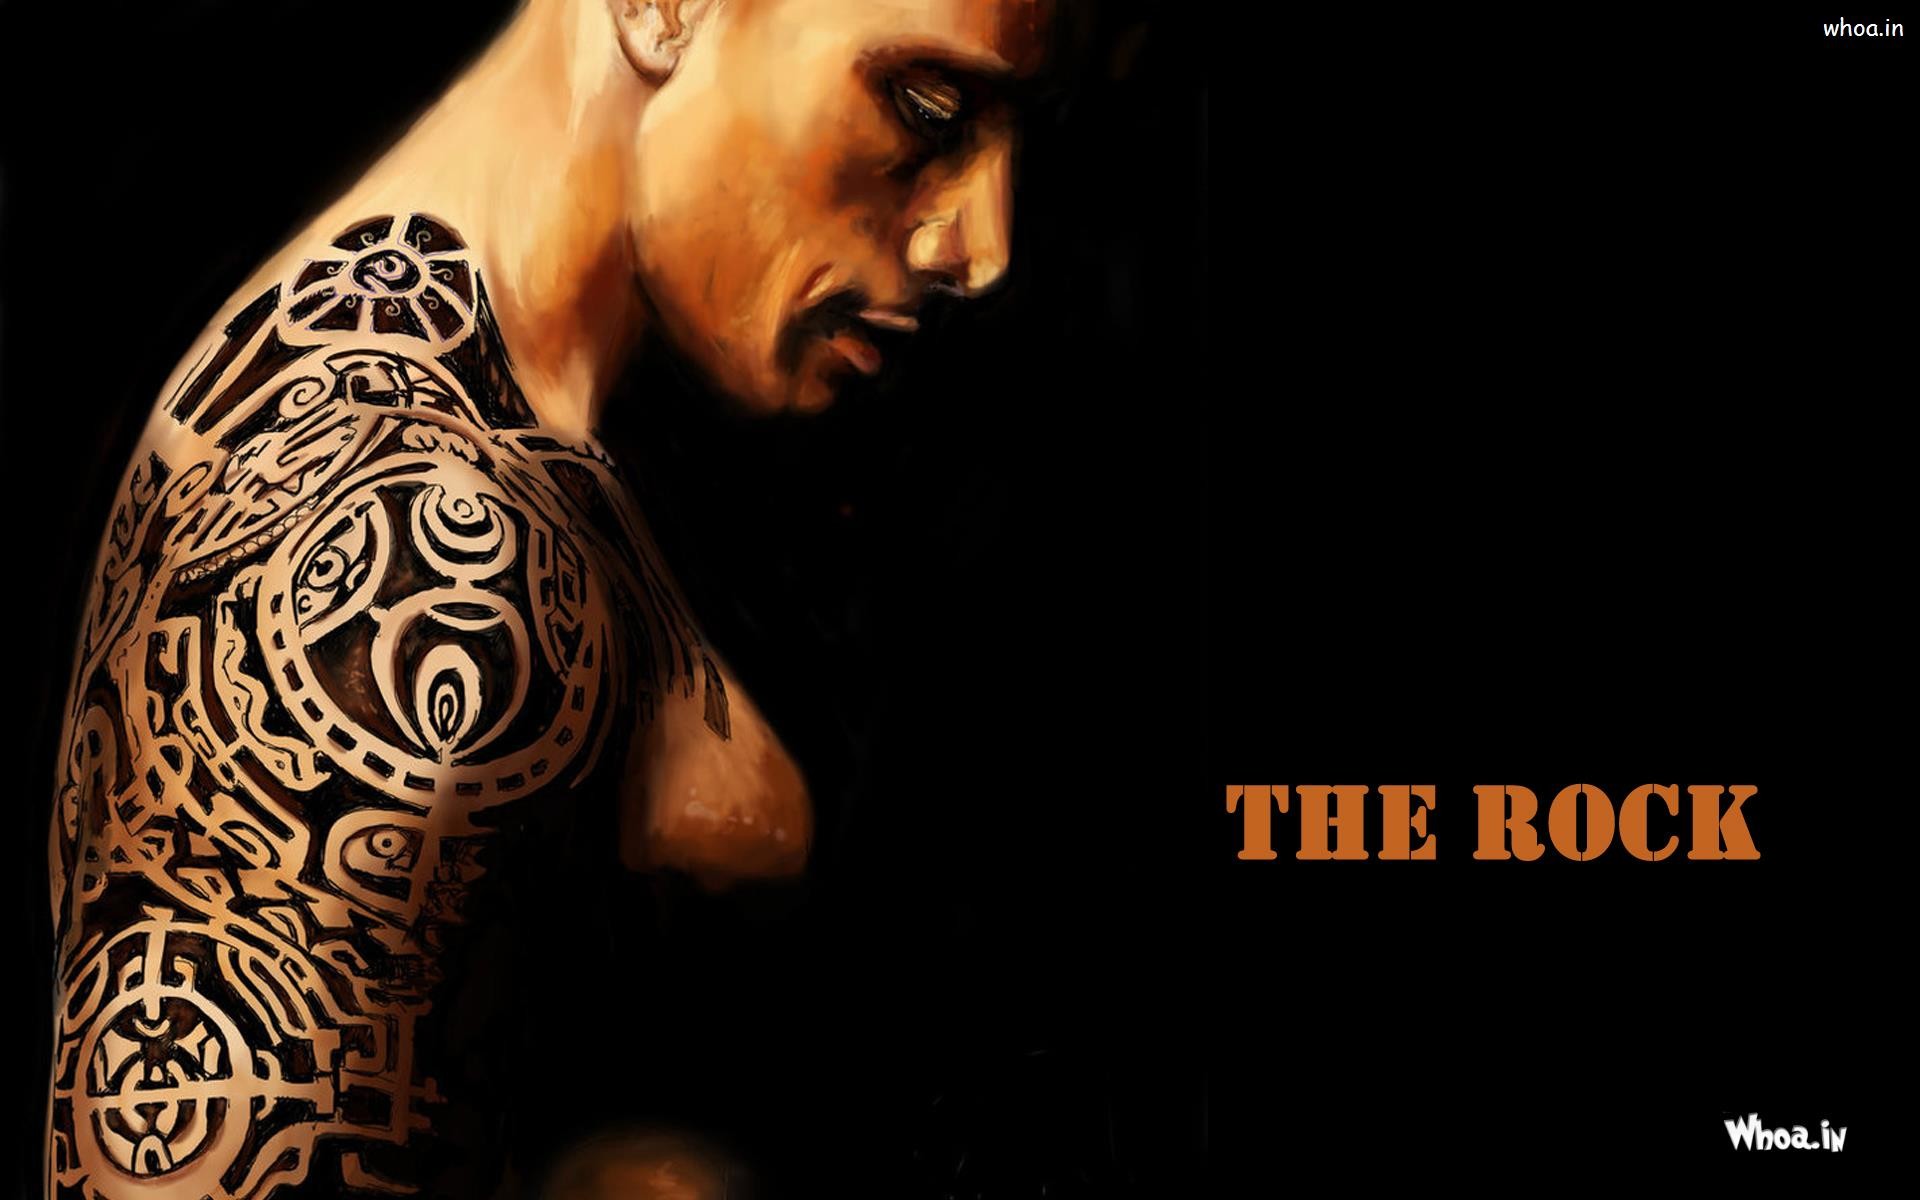 1920x1200 Wow! (700). Download. The Rock Showing Tattoo In Hand Wallpaper